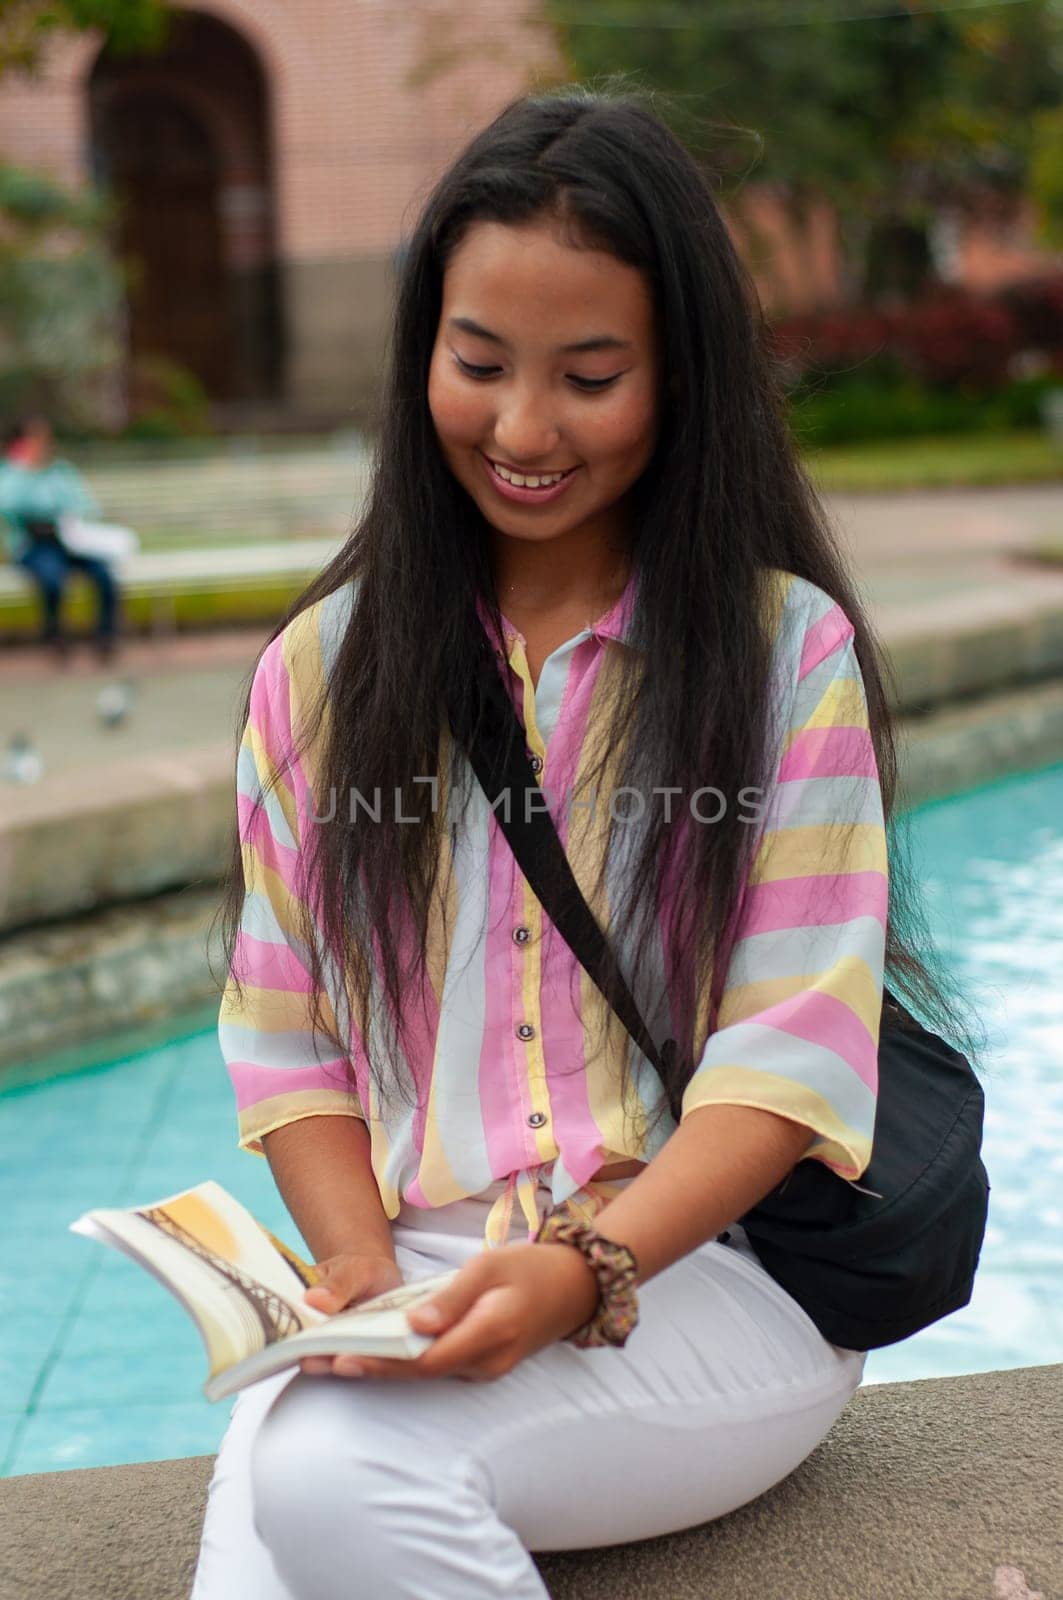 young girl from latin america sitting at the edge of a public fountain filled with water reading a book while smiling and enjoying her reading. book day by Raulmartin